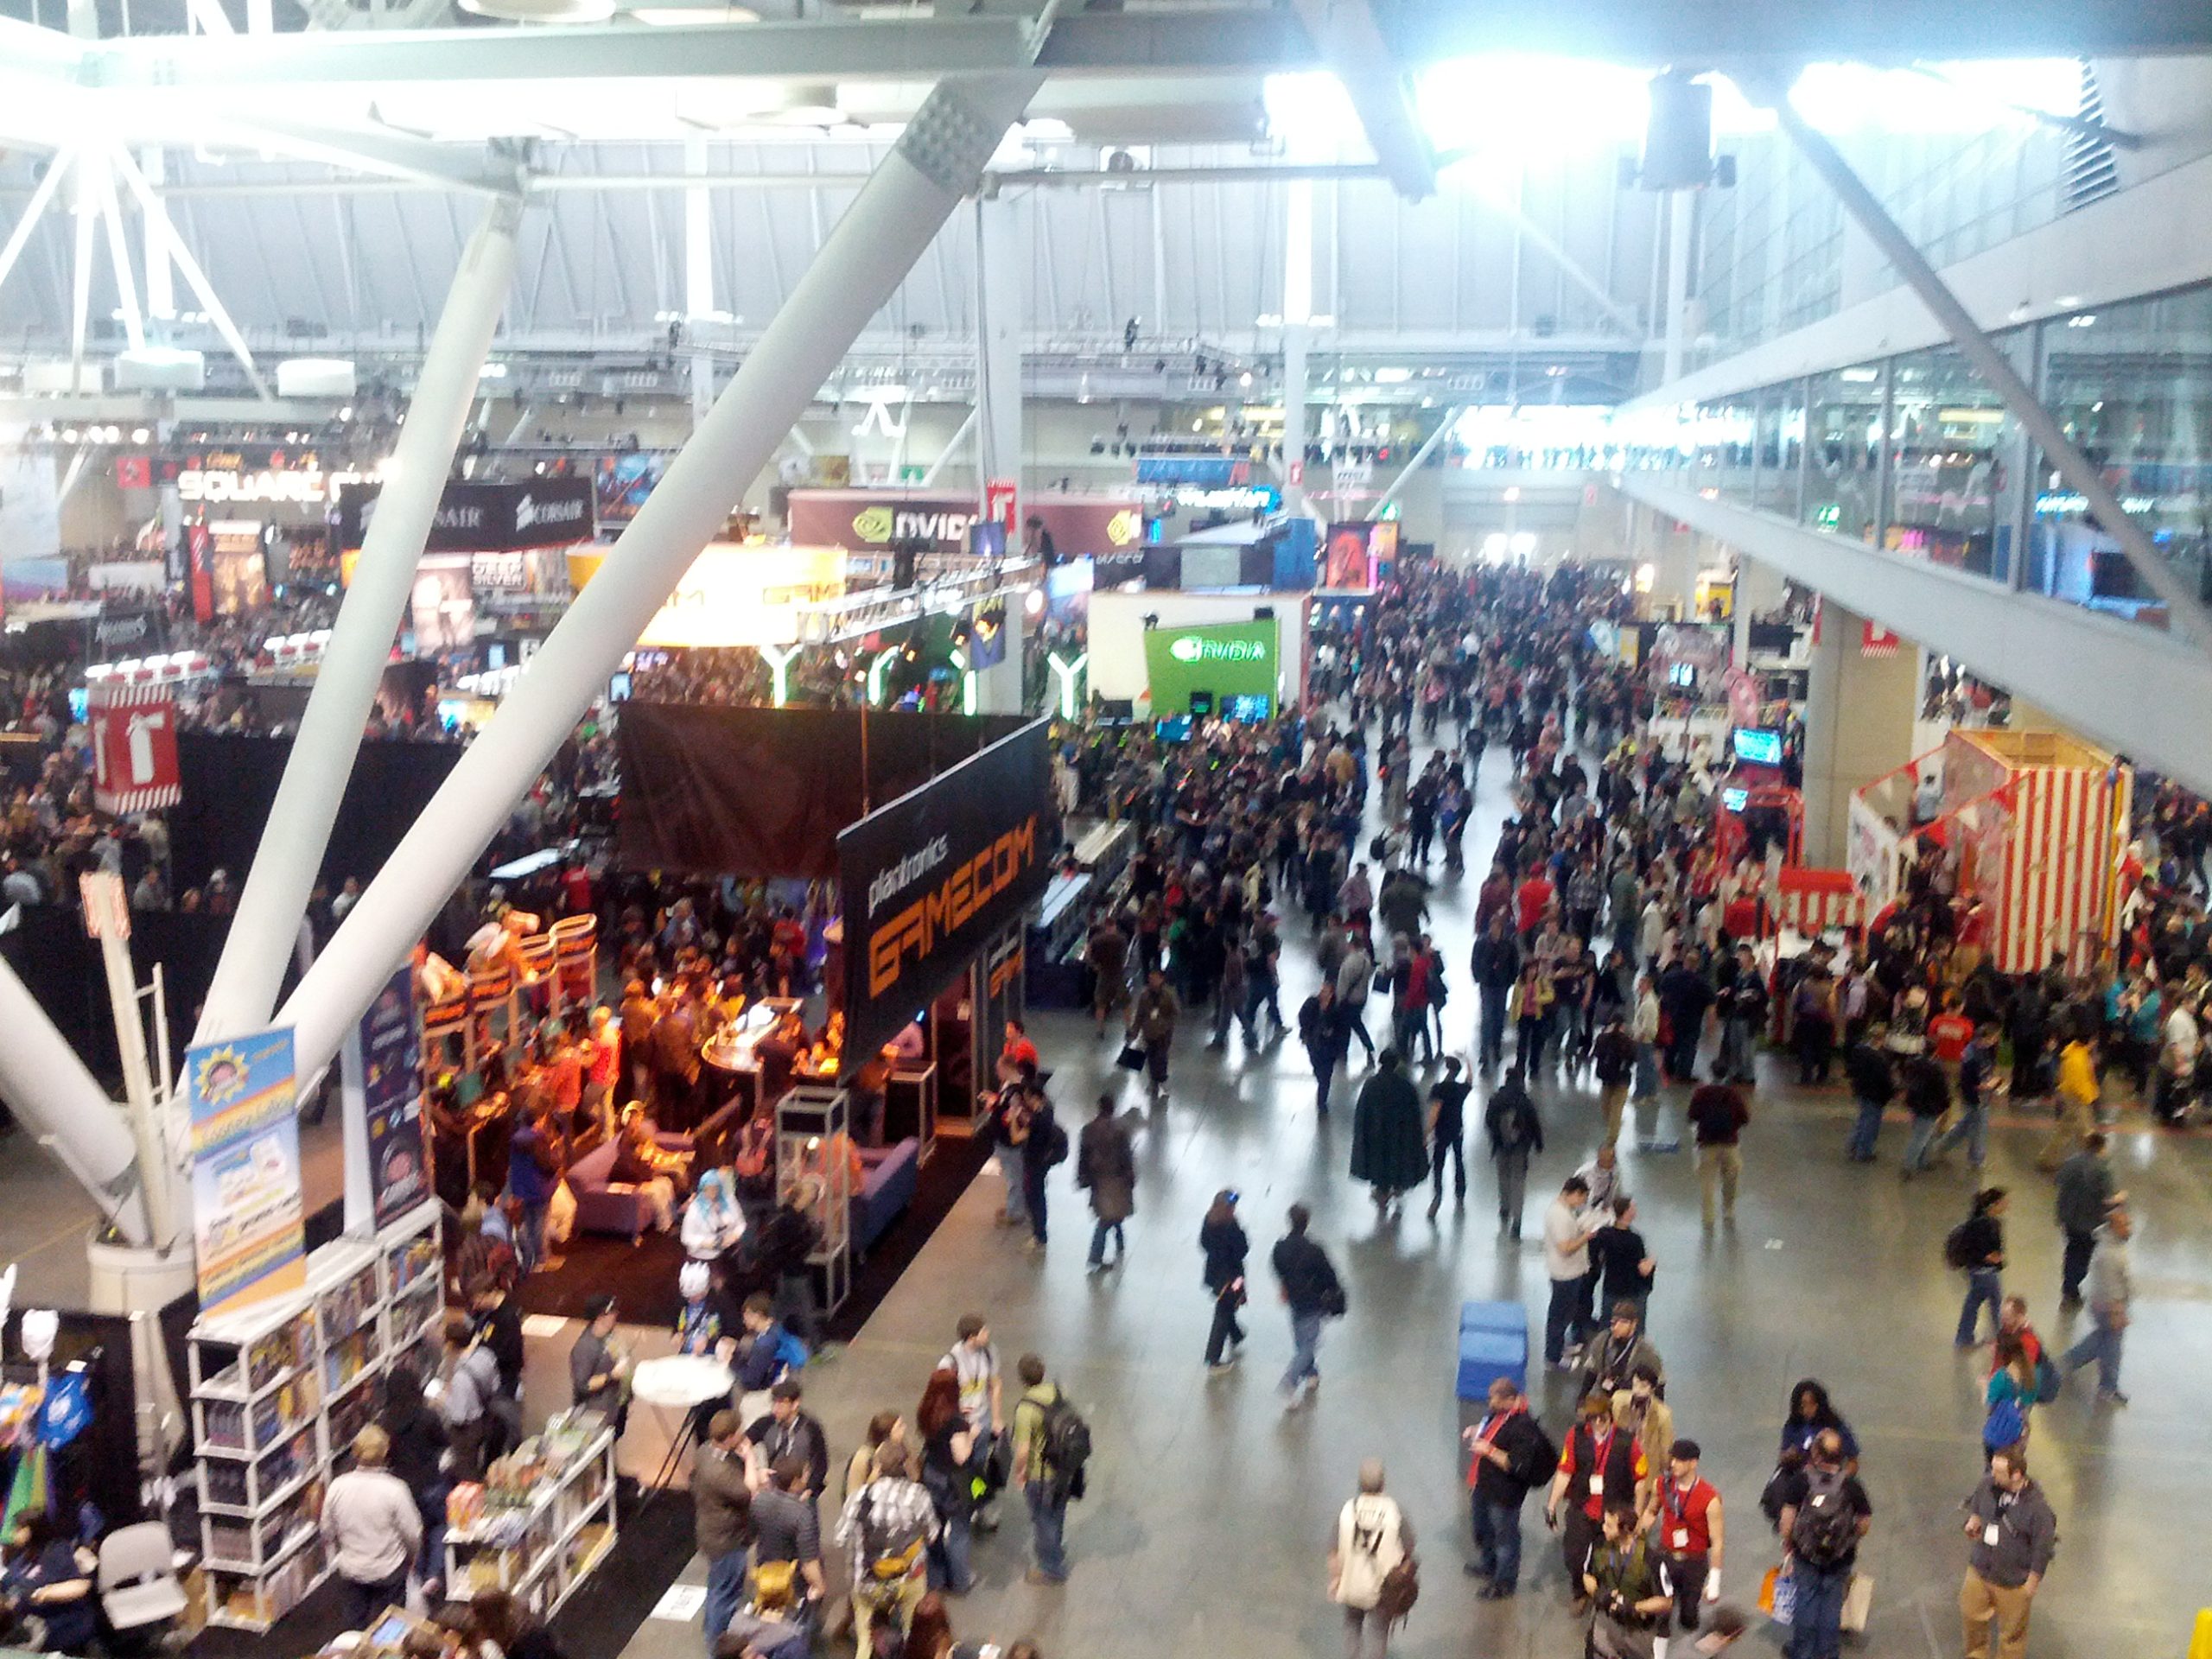 PAX East 2013: Shots from the show floor